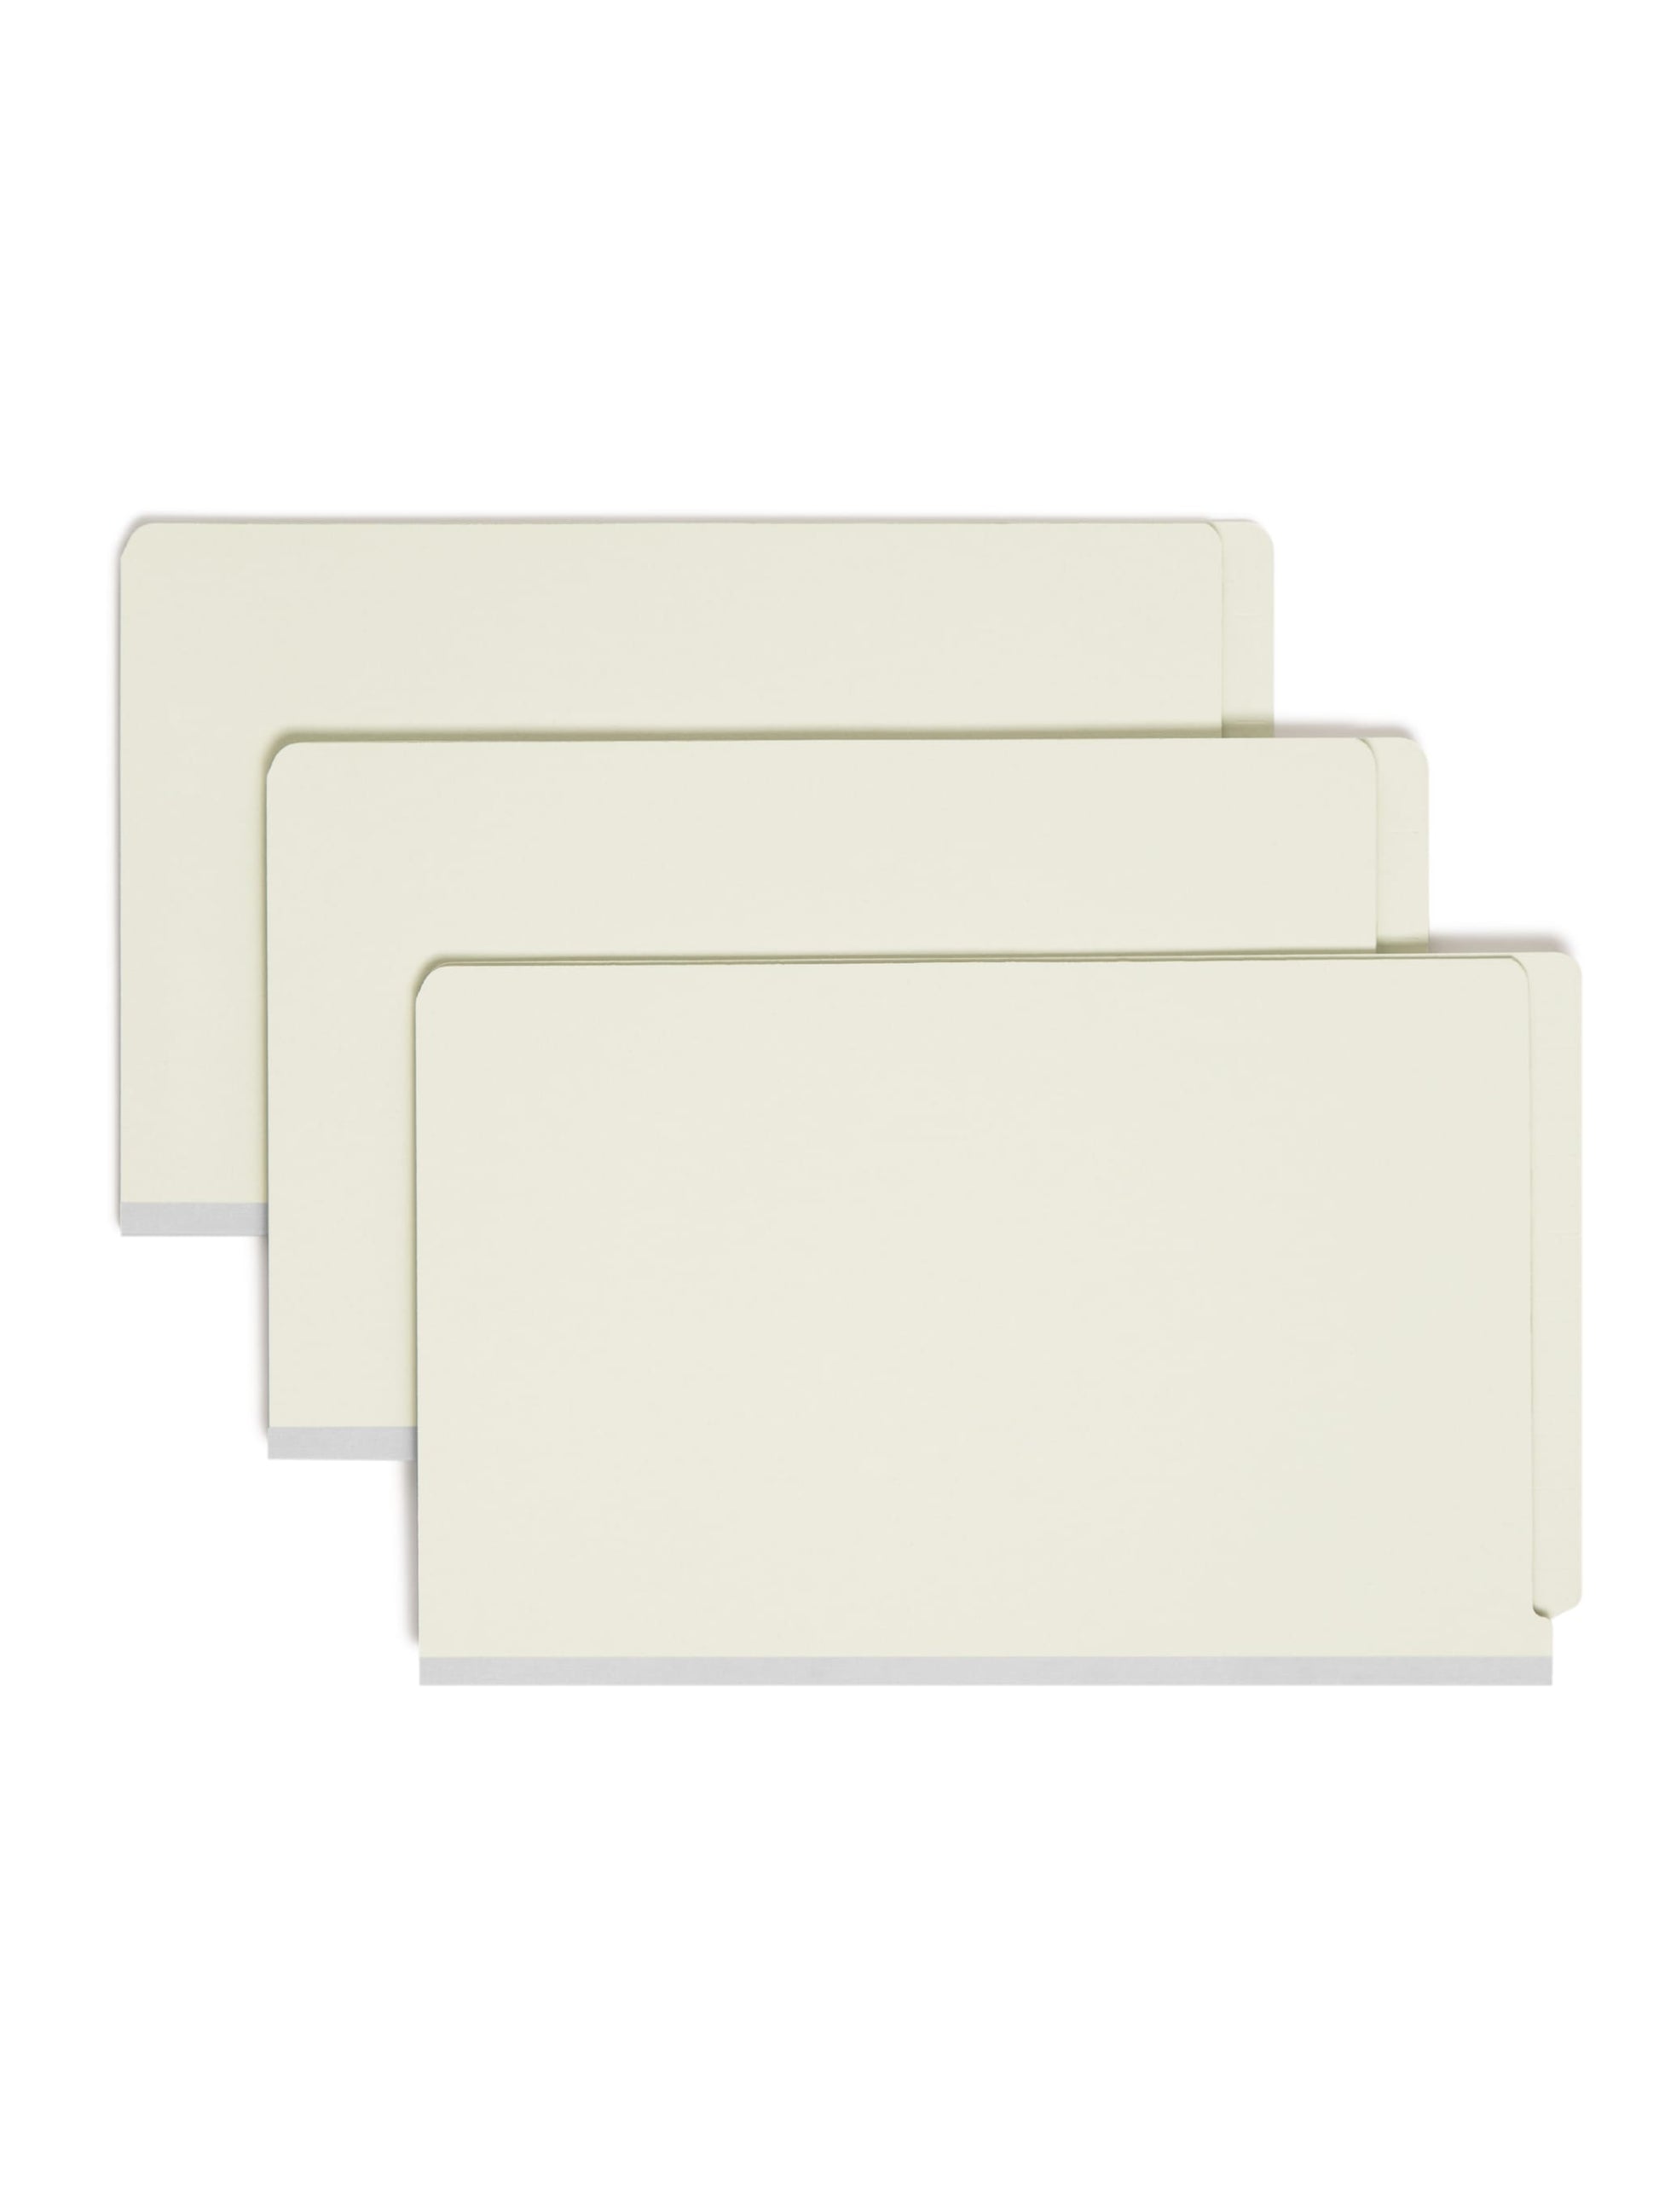 SafeSHIELD®  End Tab Classification File Folders, Straight-Cut Tab, 2 inch Expansion, 2 Pocket, 2 Divider, Gray/Green Color, Letter Size, Set of 0, 30086486267107